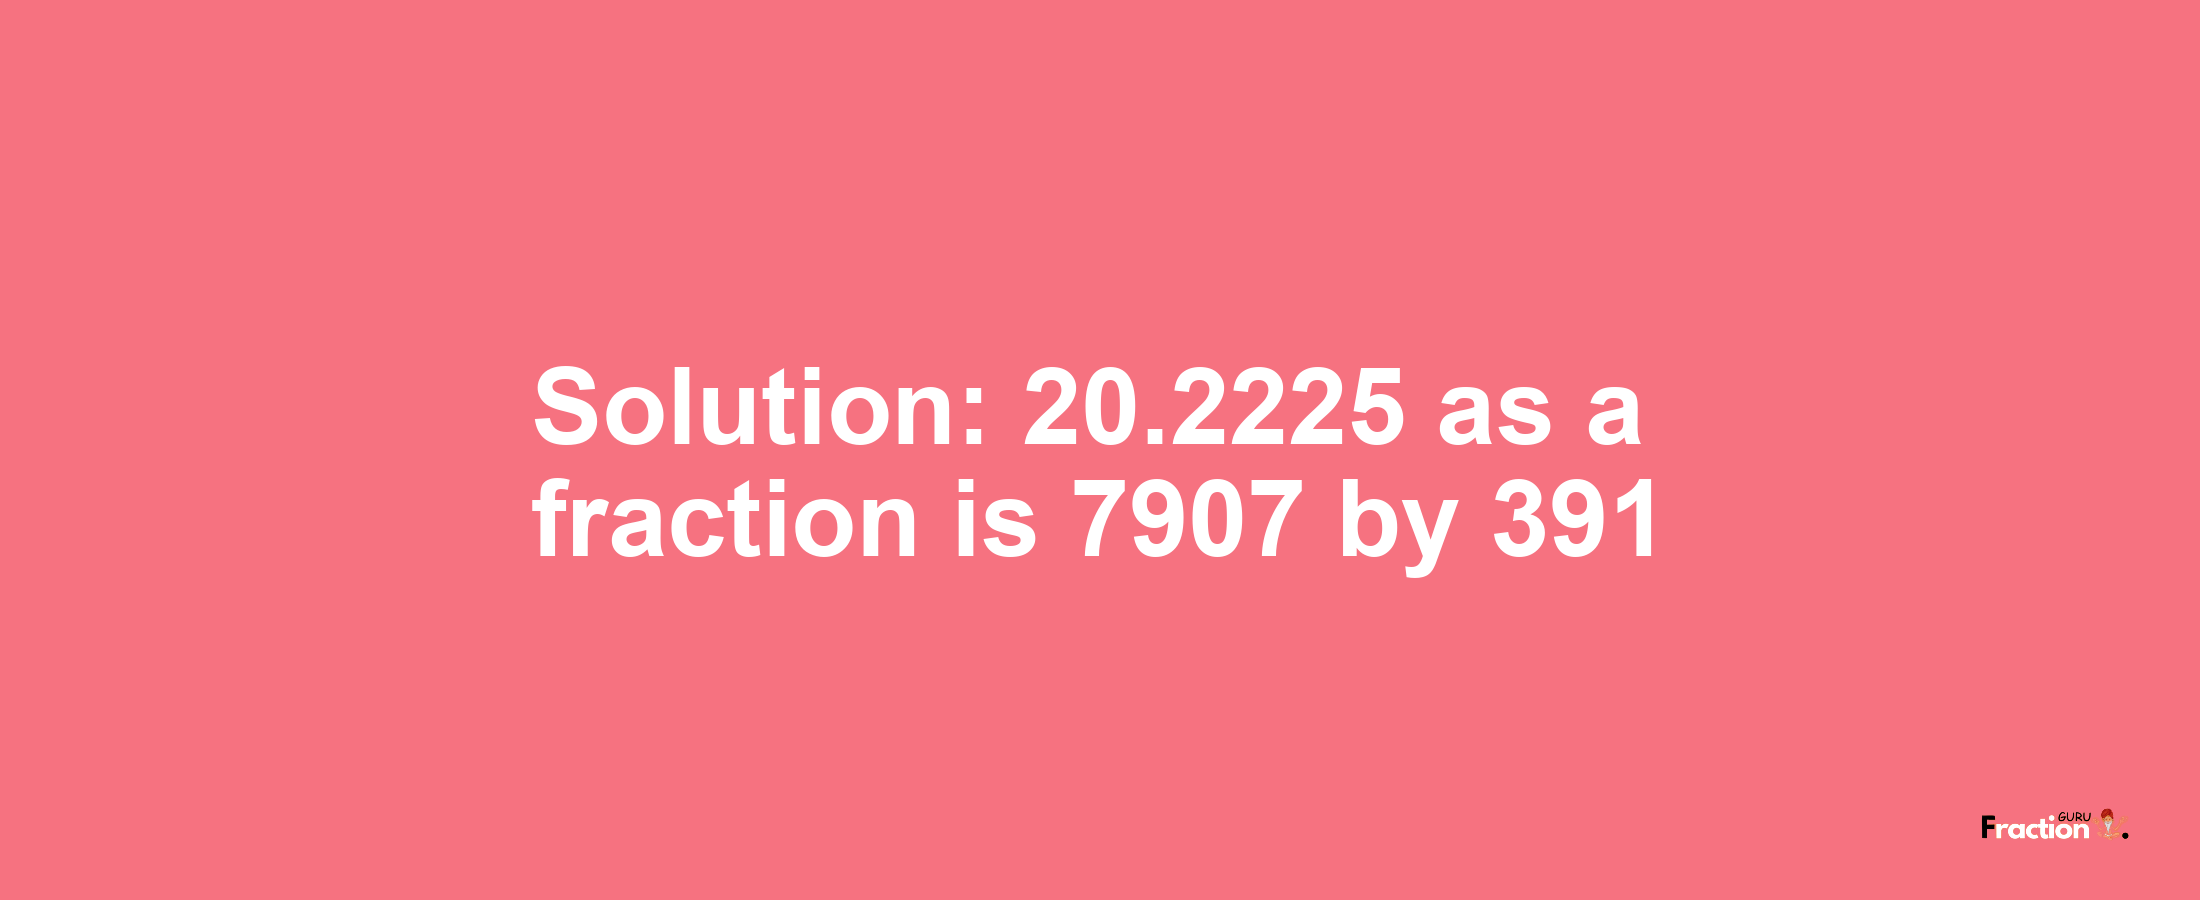 Solution:20.2225 as a fraction is 7907/391